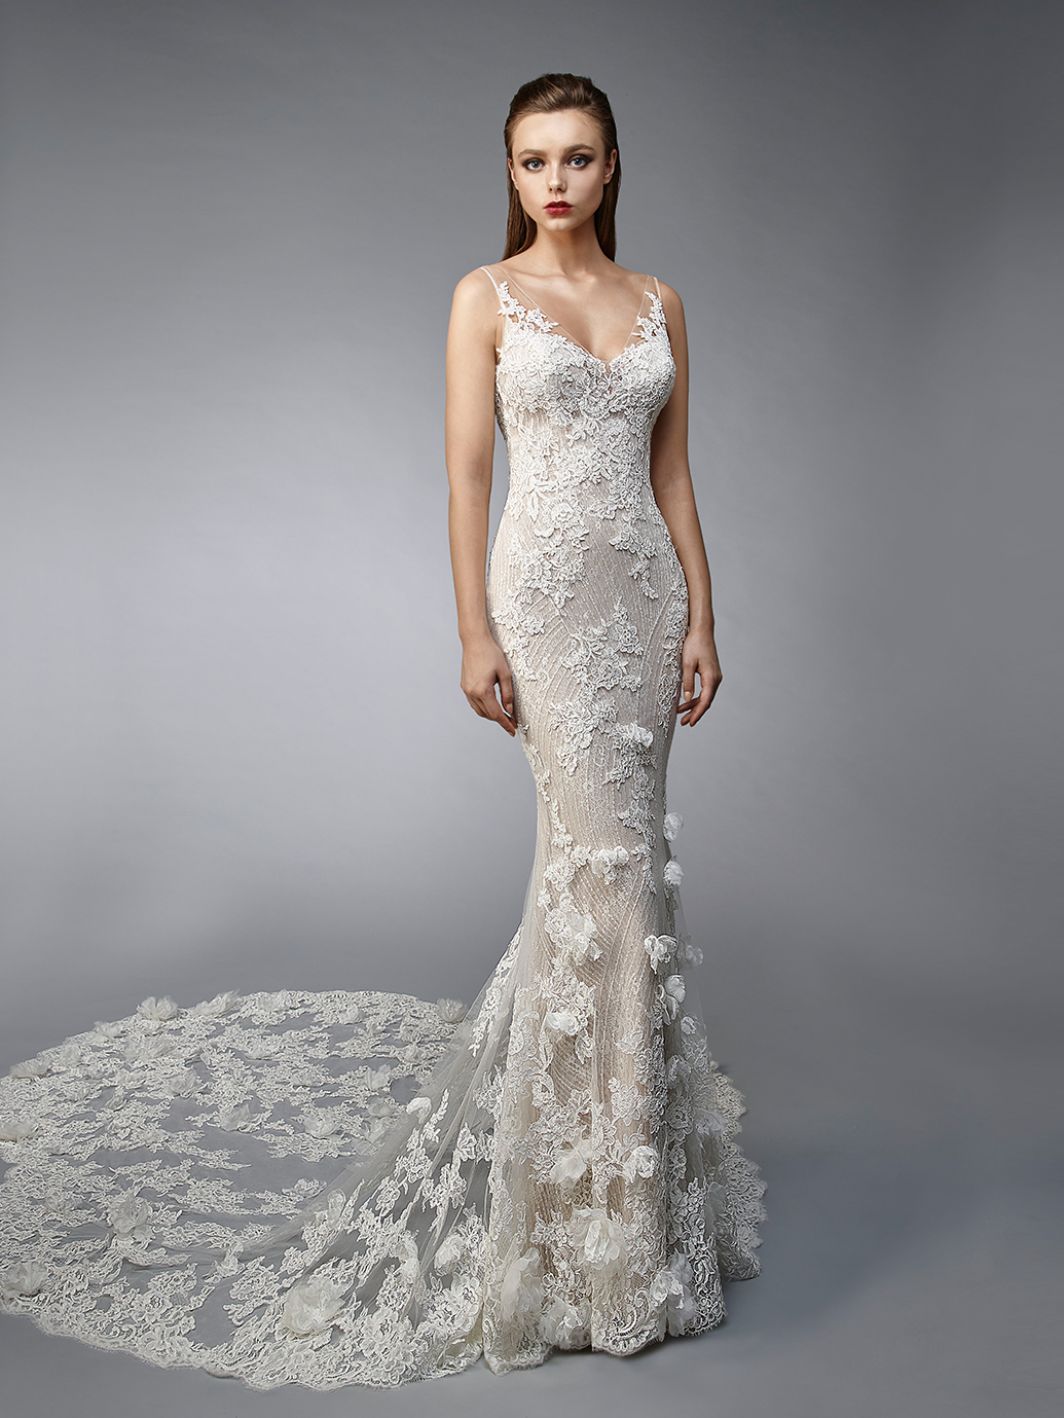 The Nicolette Gown by Enzoani Size 10